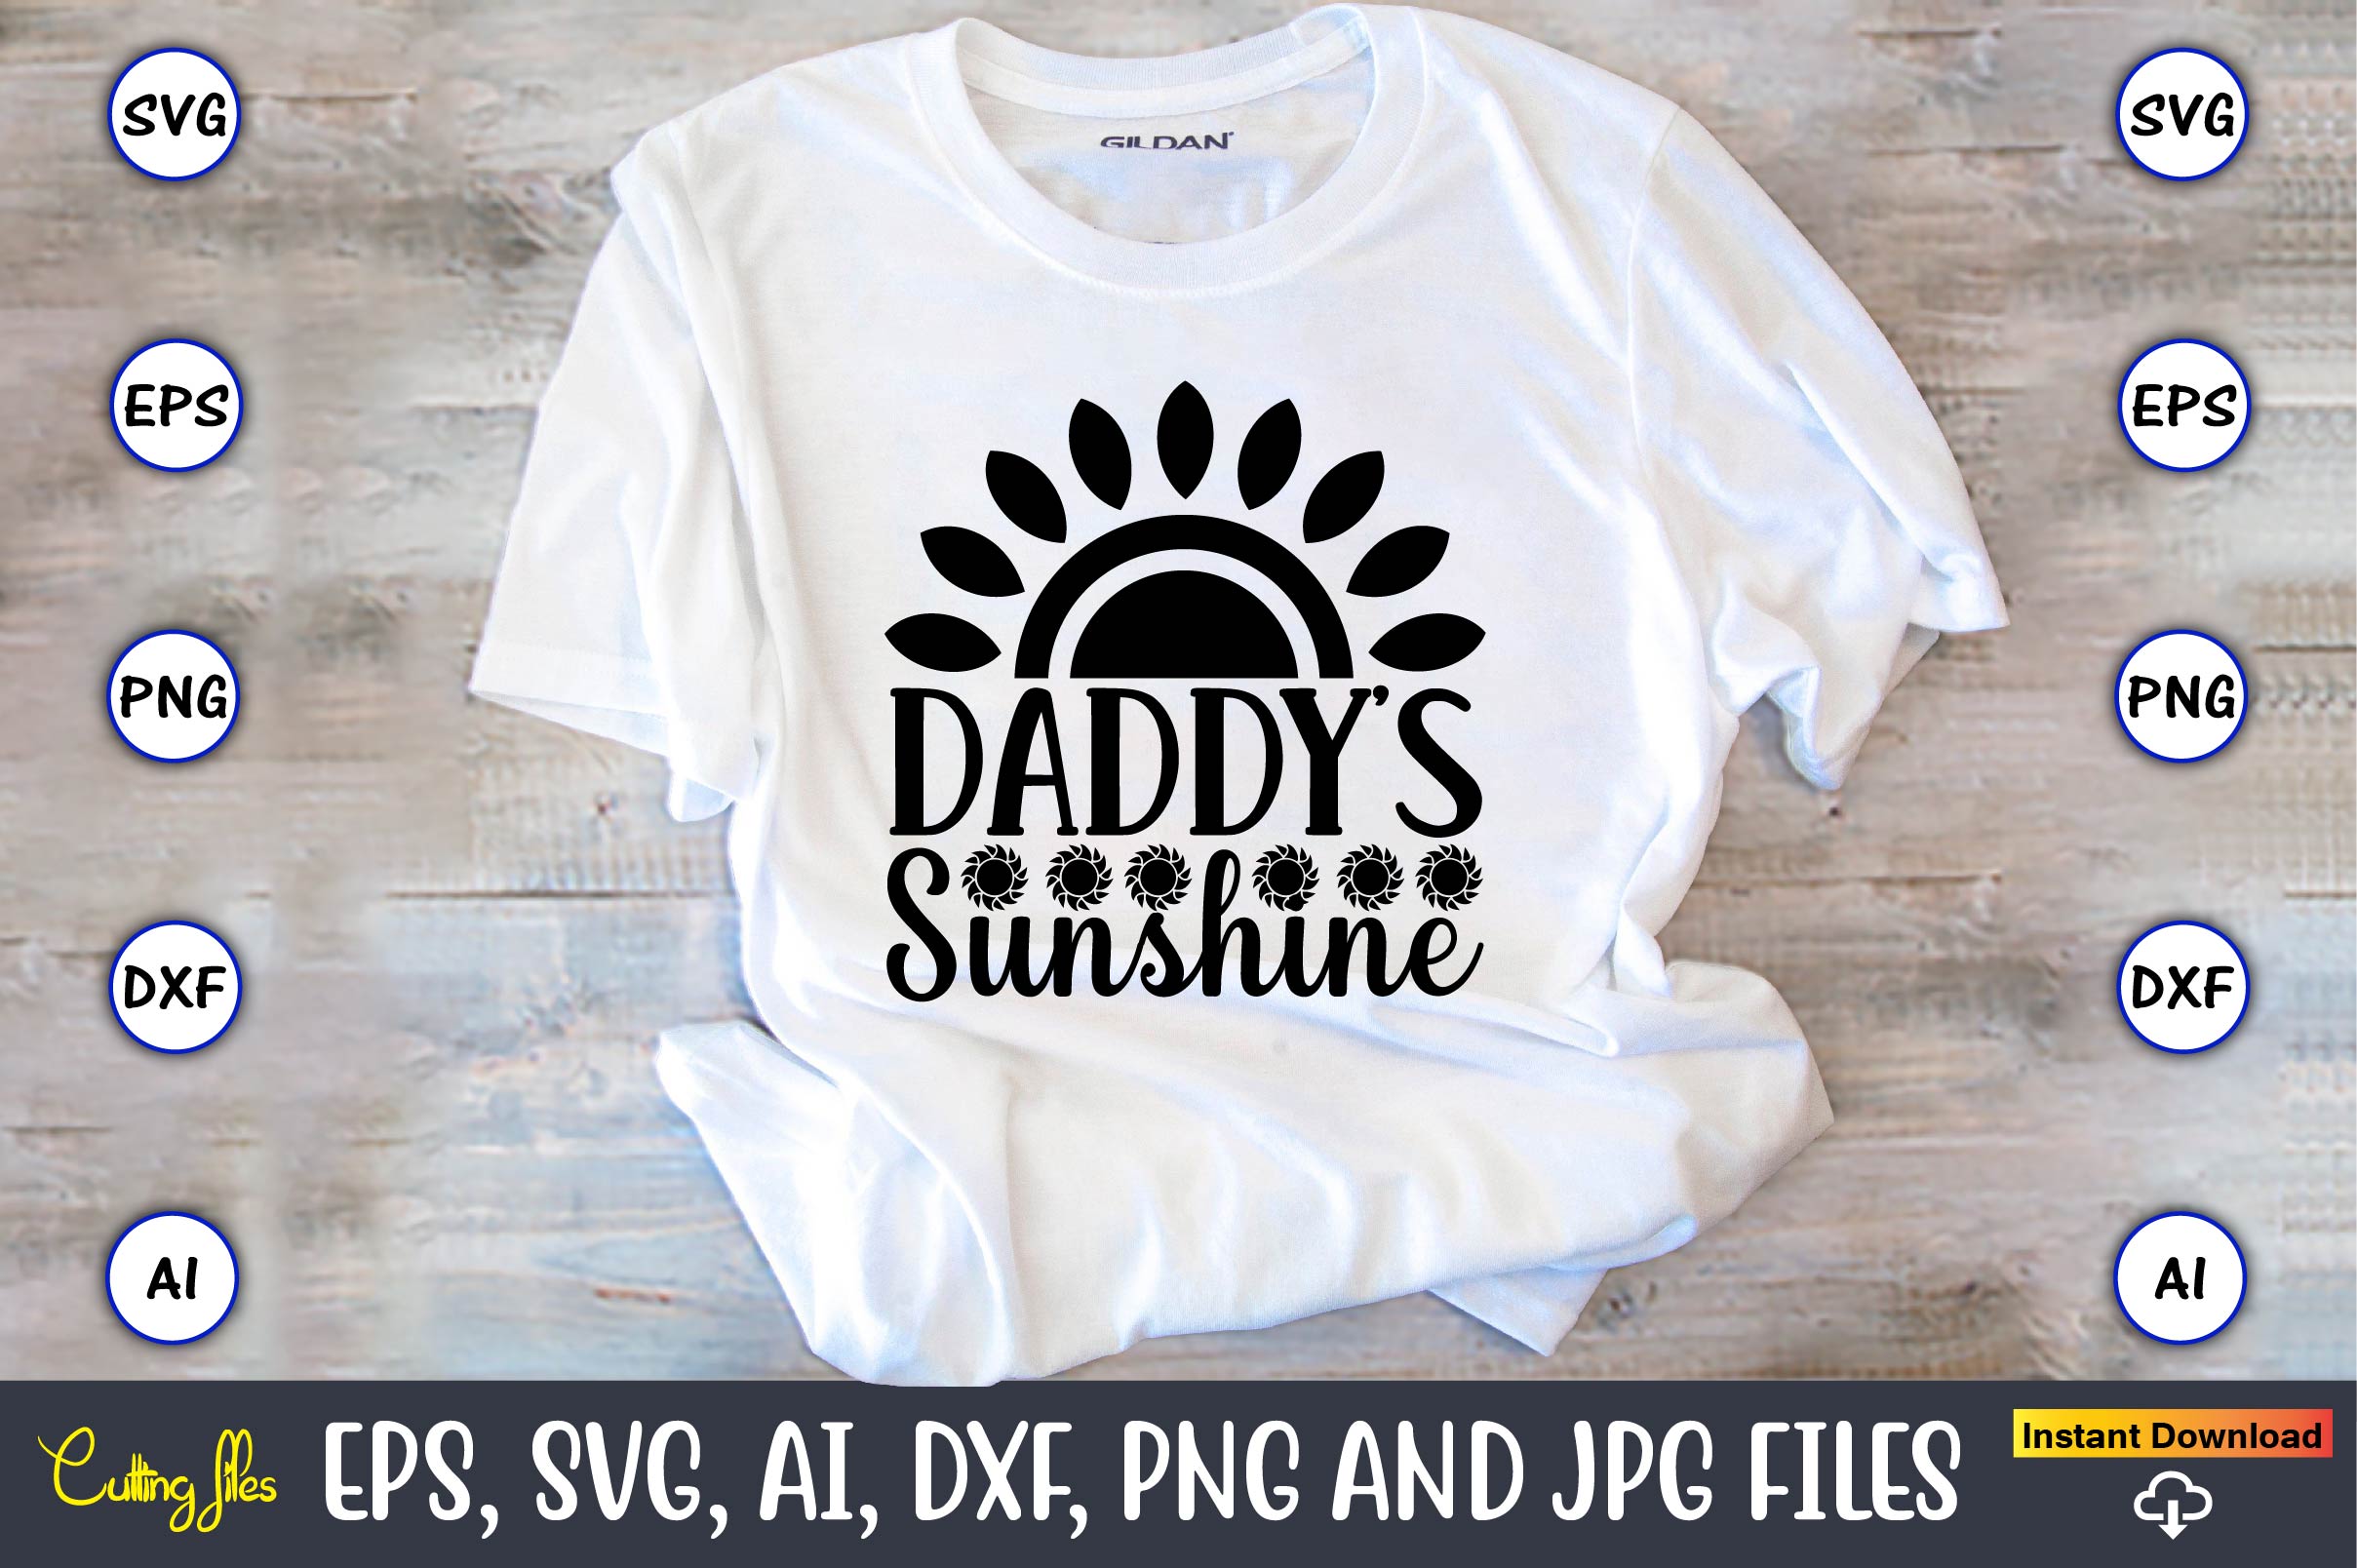 Image of a white t-shirt with a wonderful inscription Daddy's sunshine.